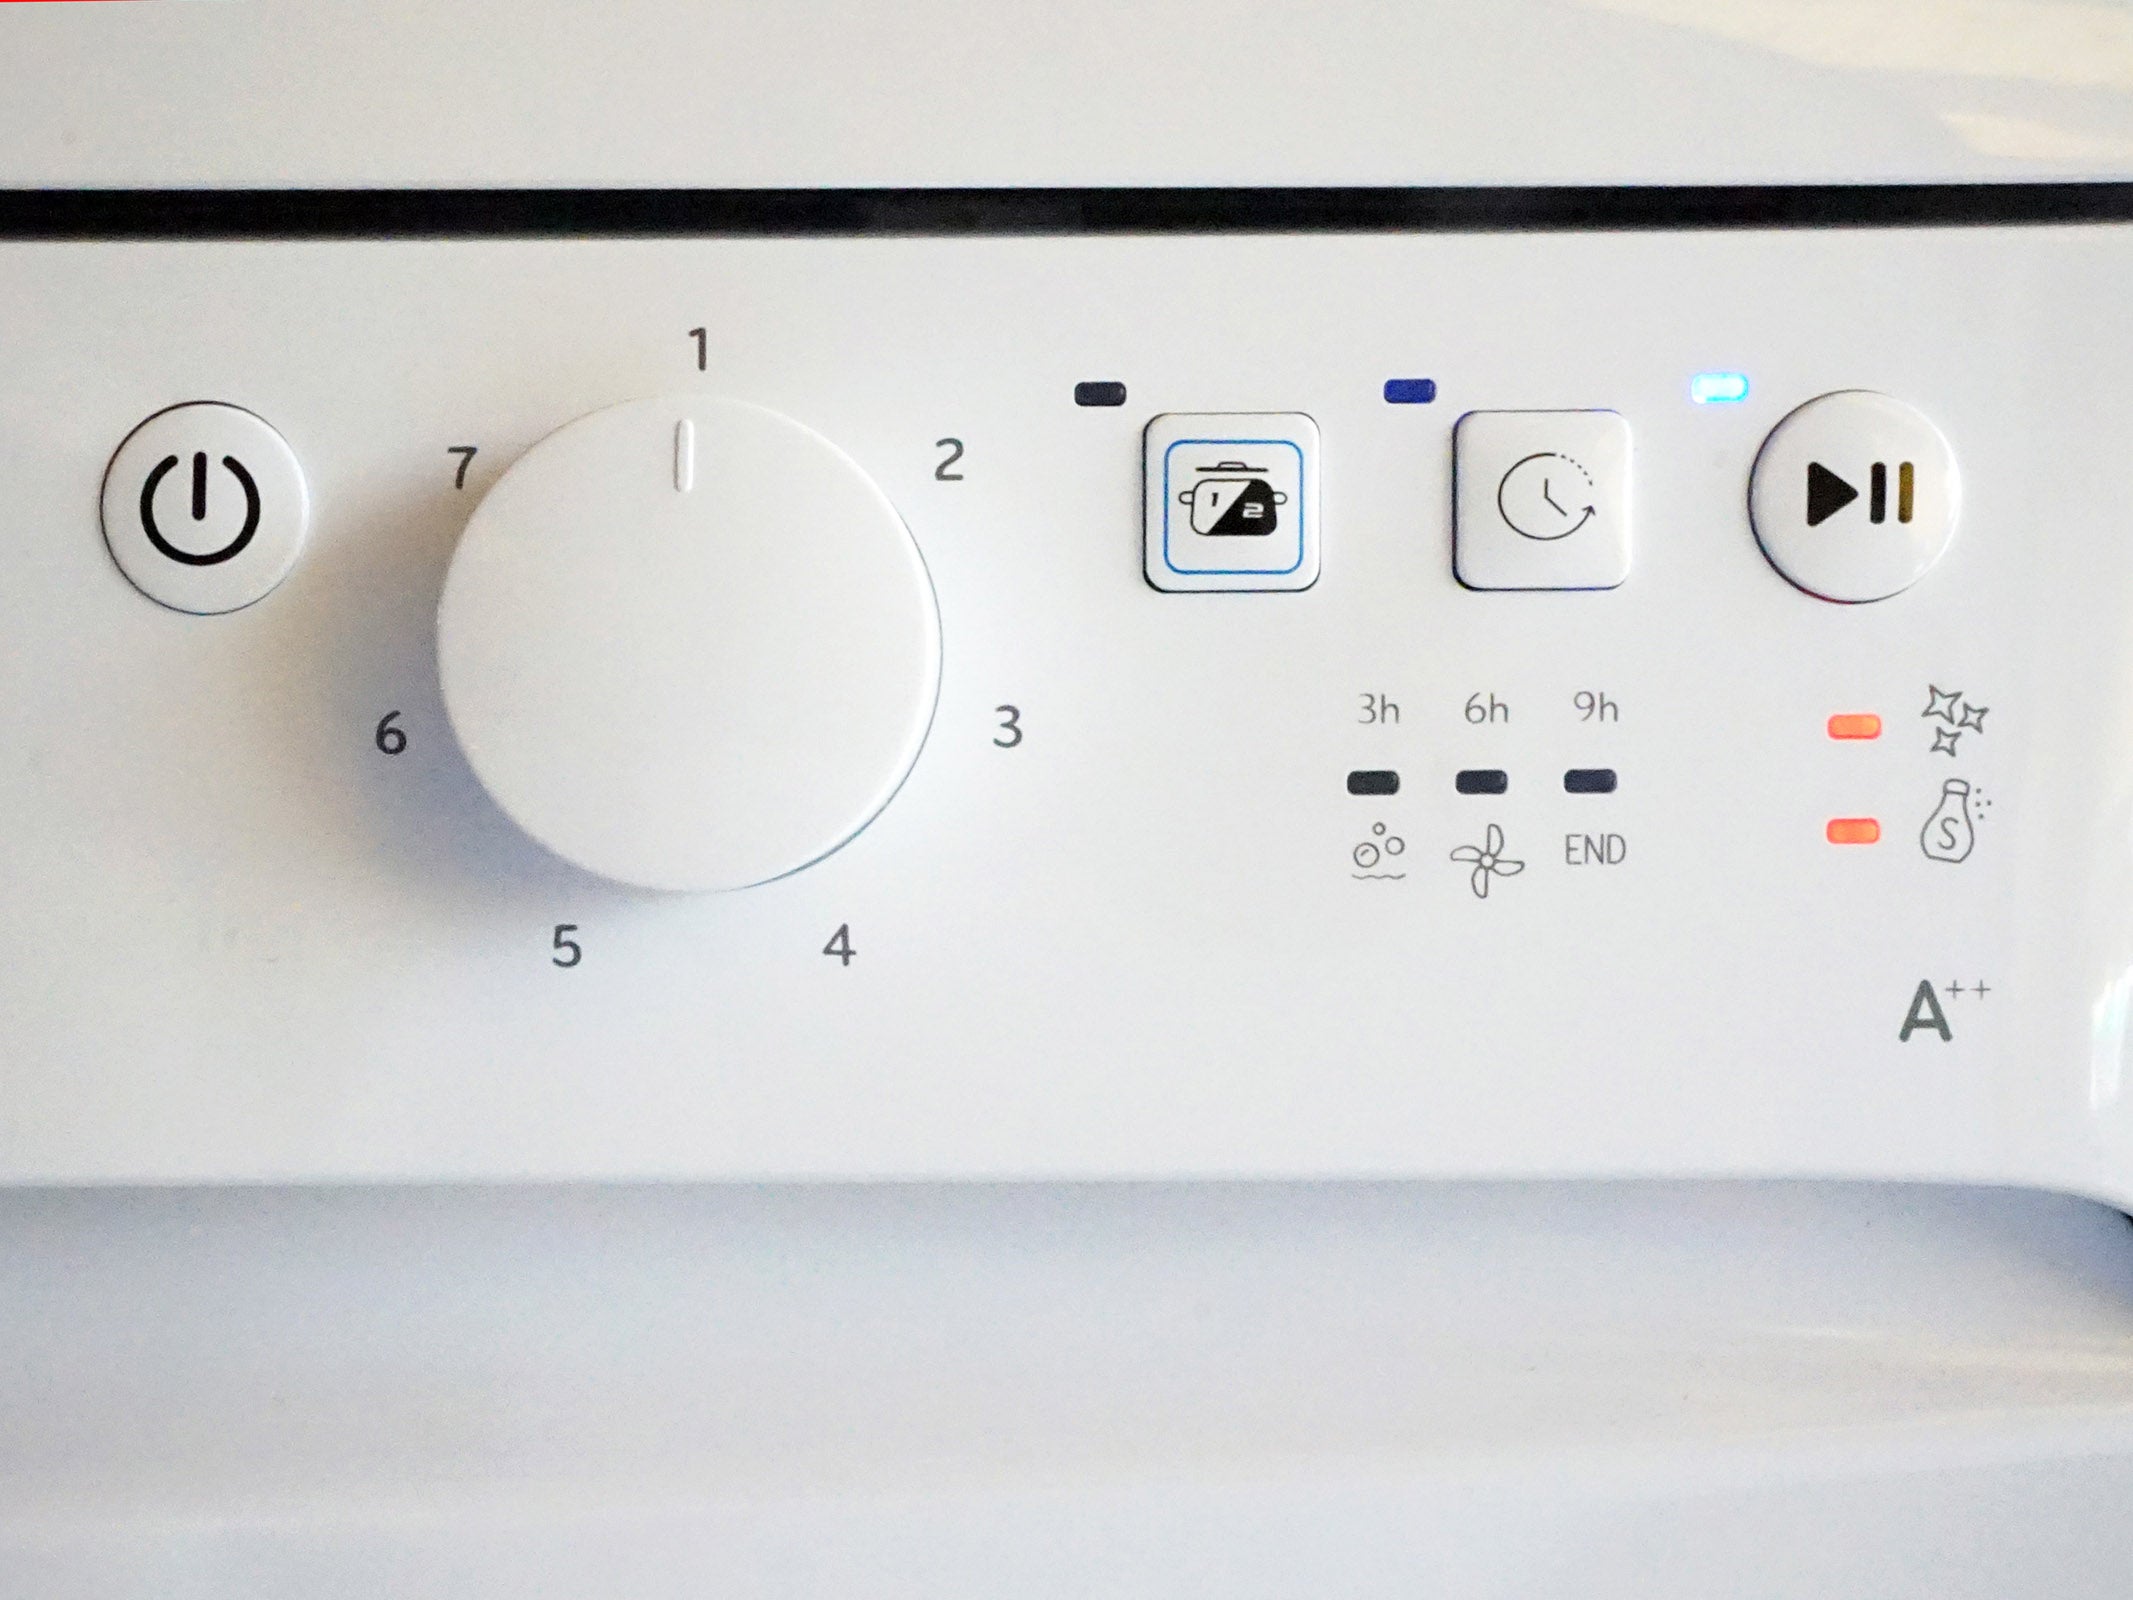 Control panel of Indesit dishwasher with program icons and energy rating.